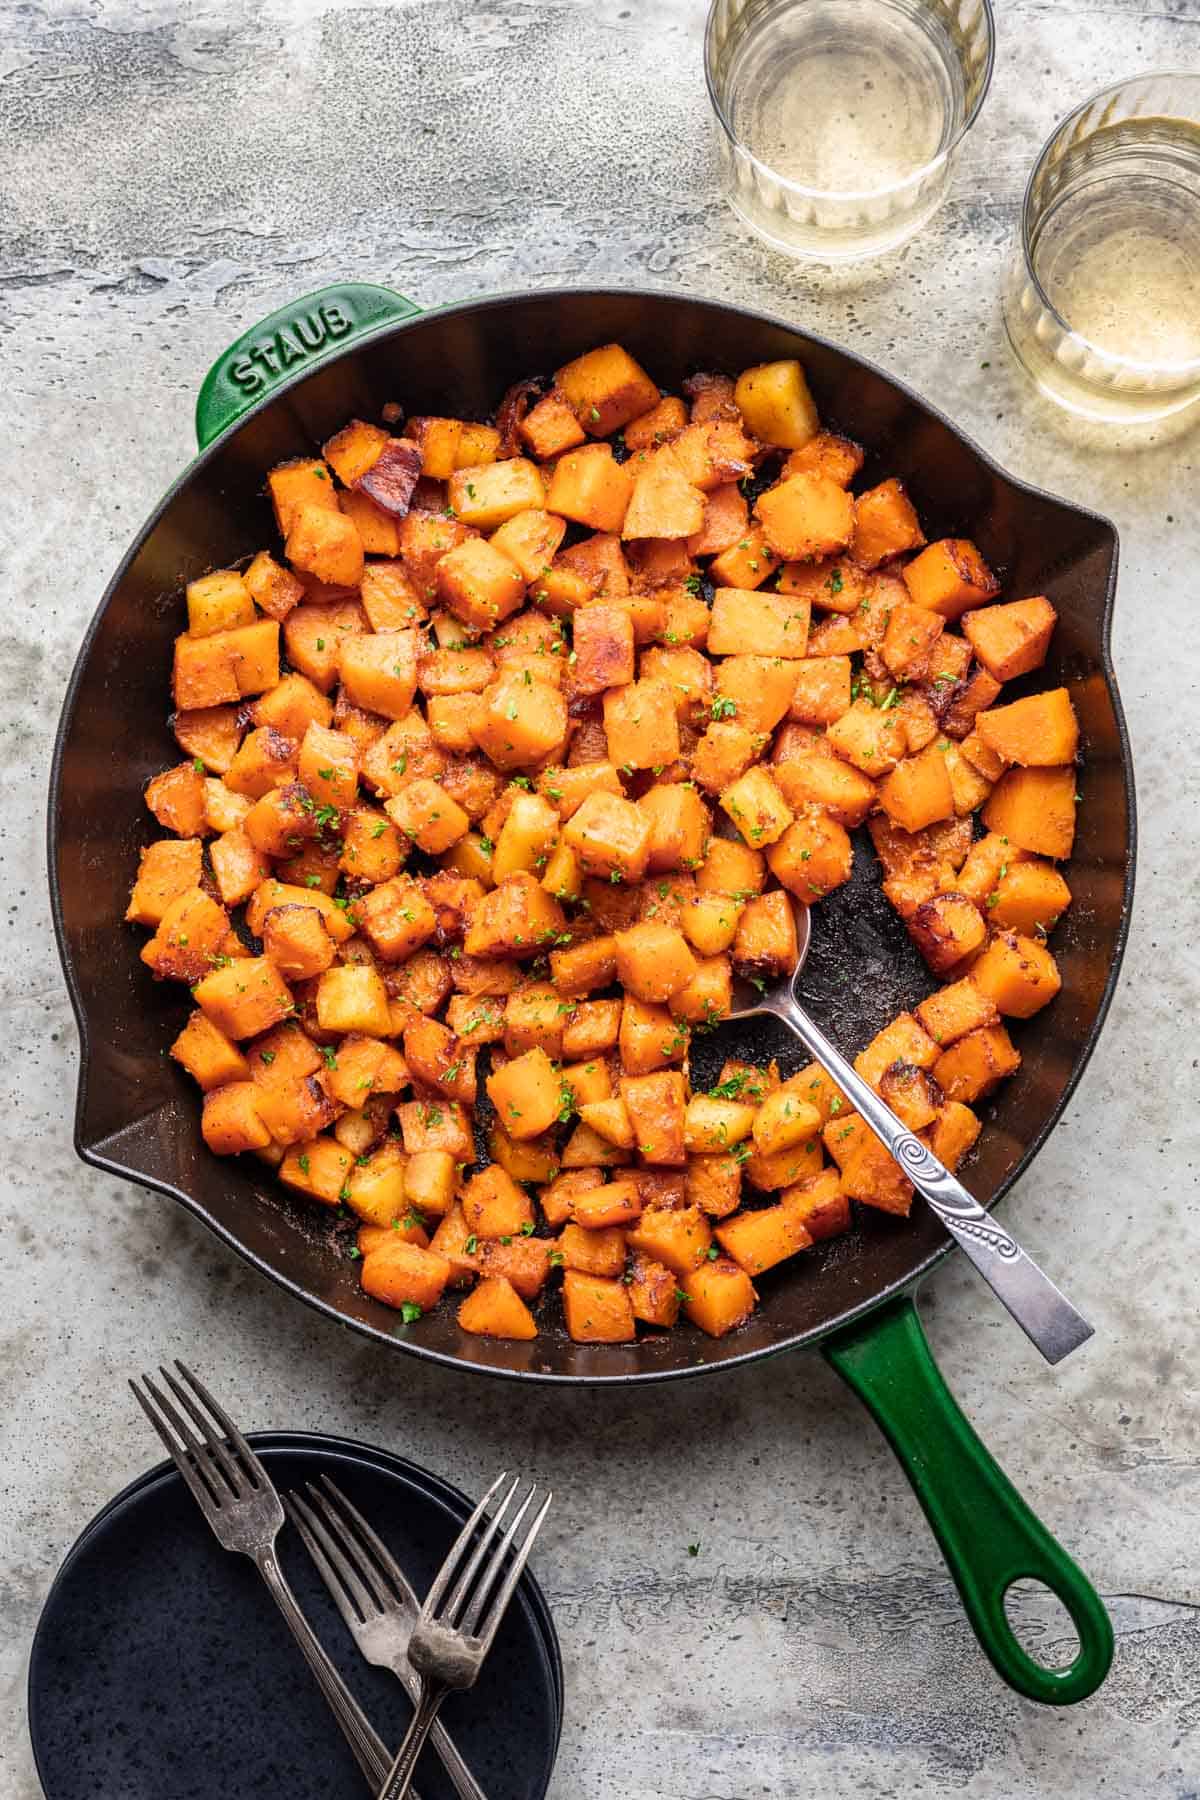 Sautéed butternut squash in a skillet with serving plates and glasses of wine next to it.